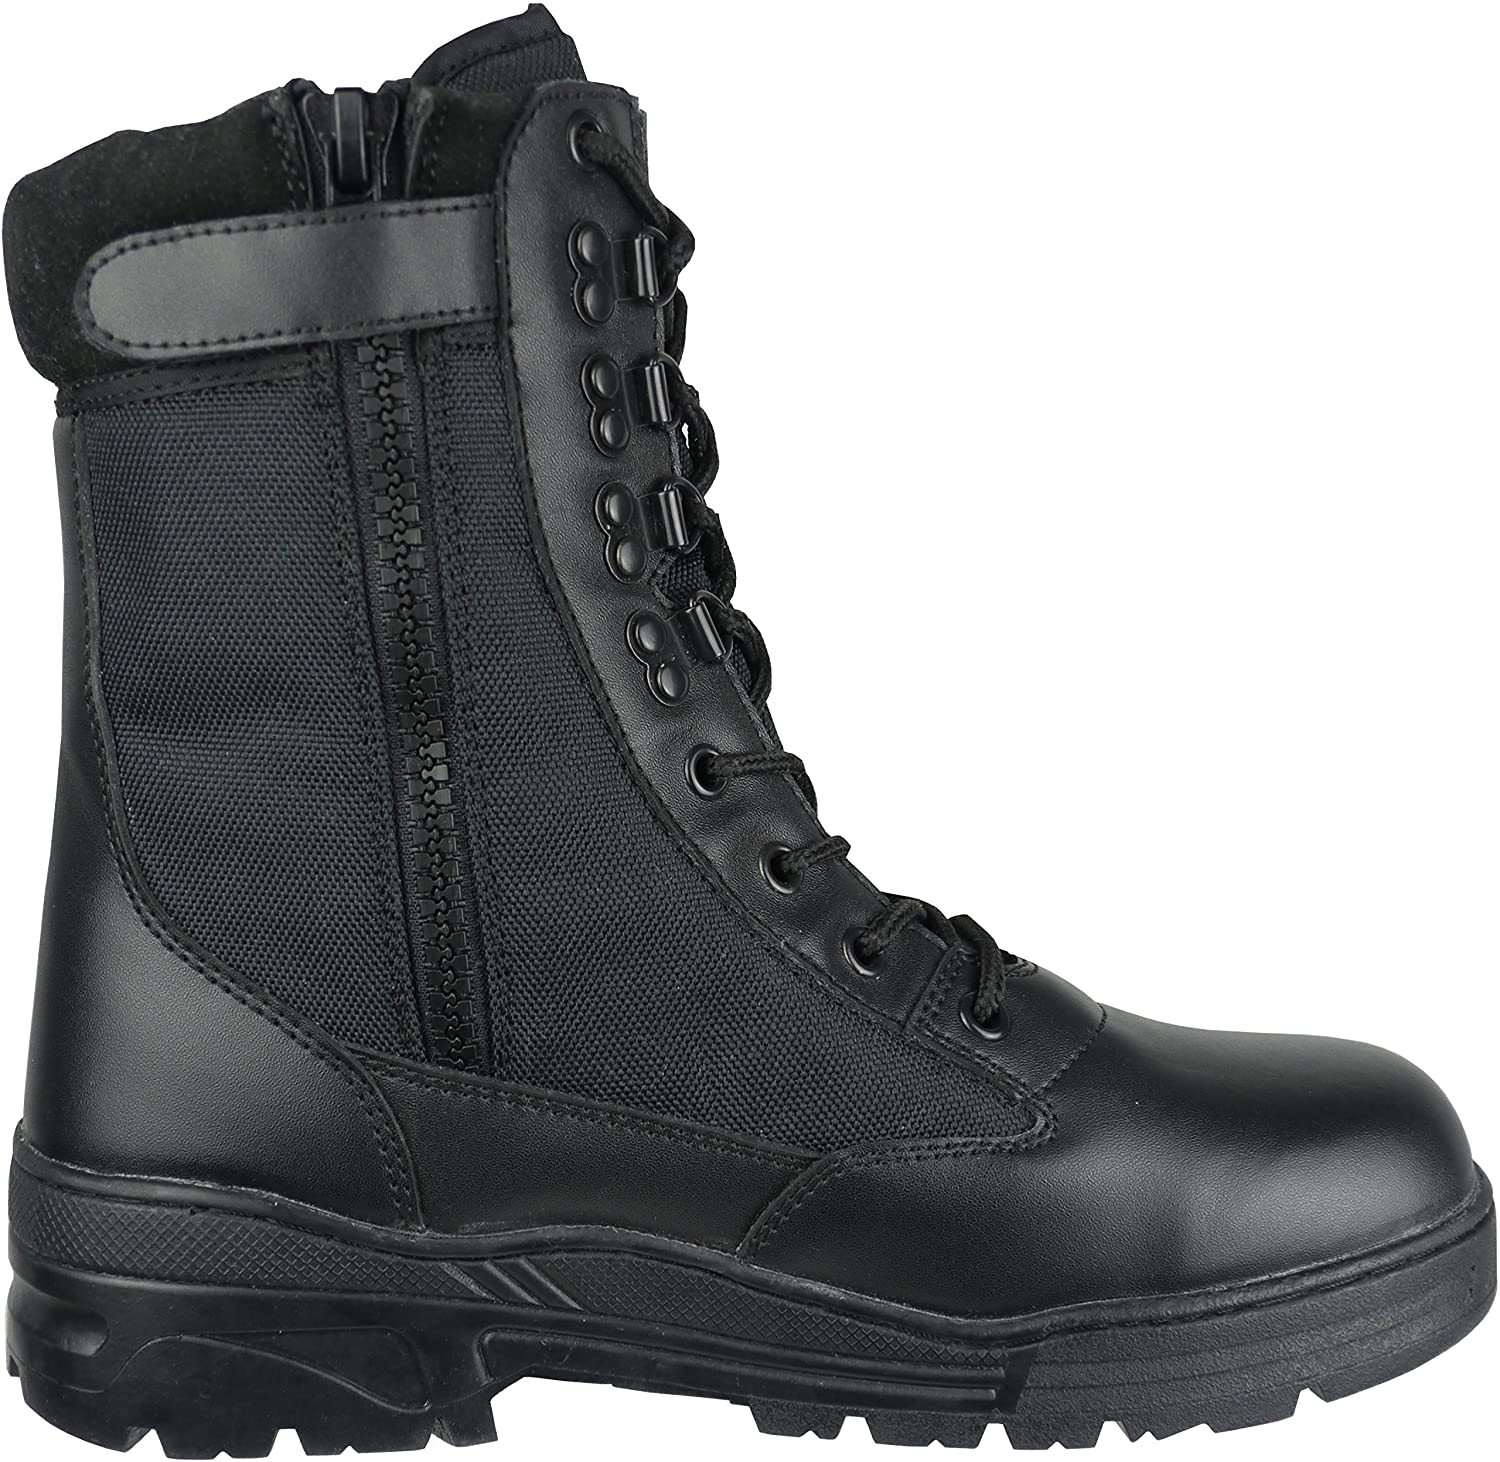 Savage Island Combat Boots Black Leather Side Zip Army